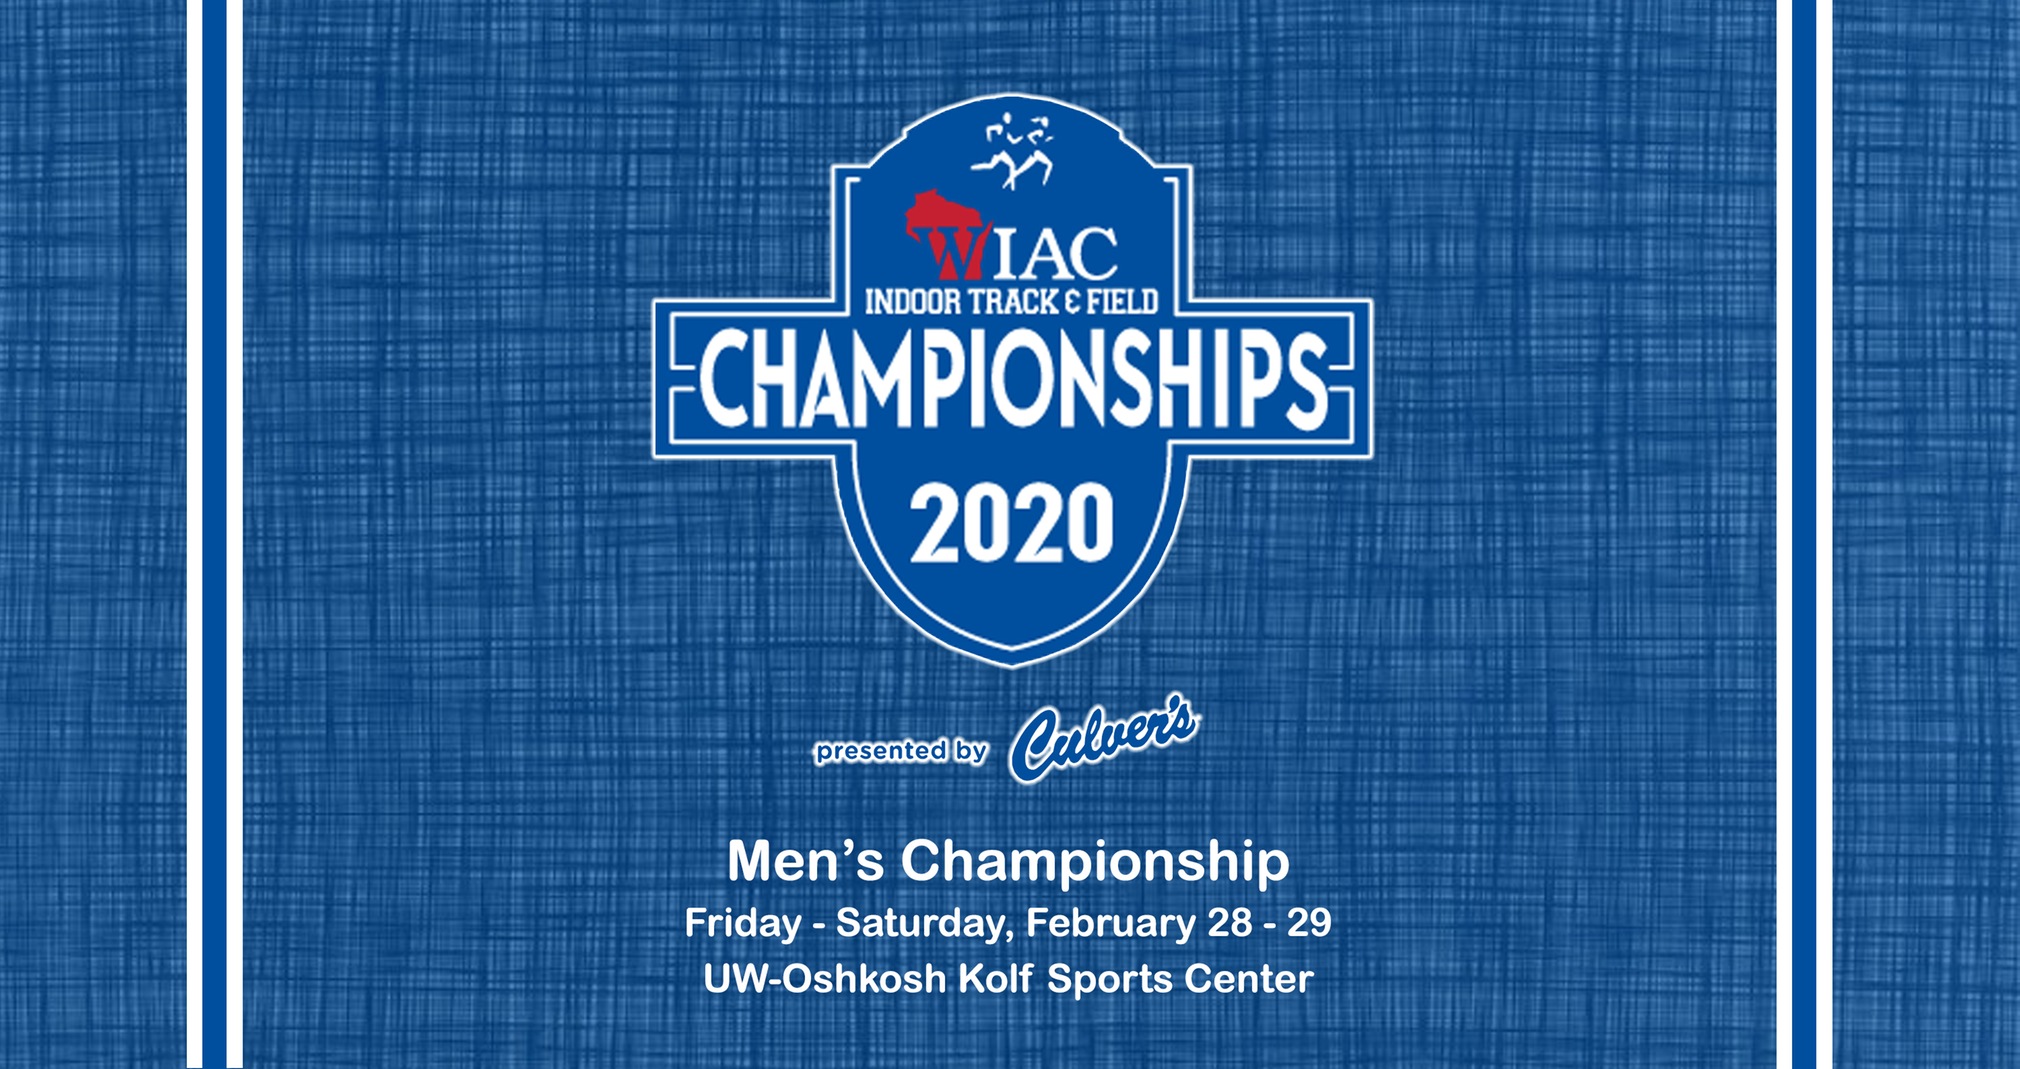 Titans Aim For First-Place Finish At WIAC Championship